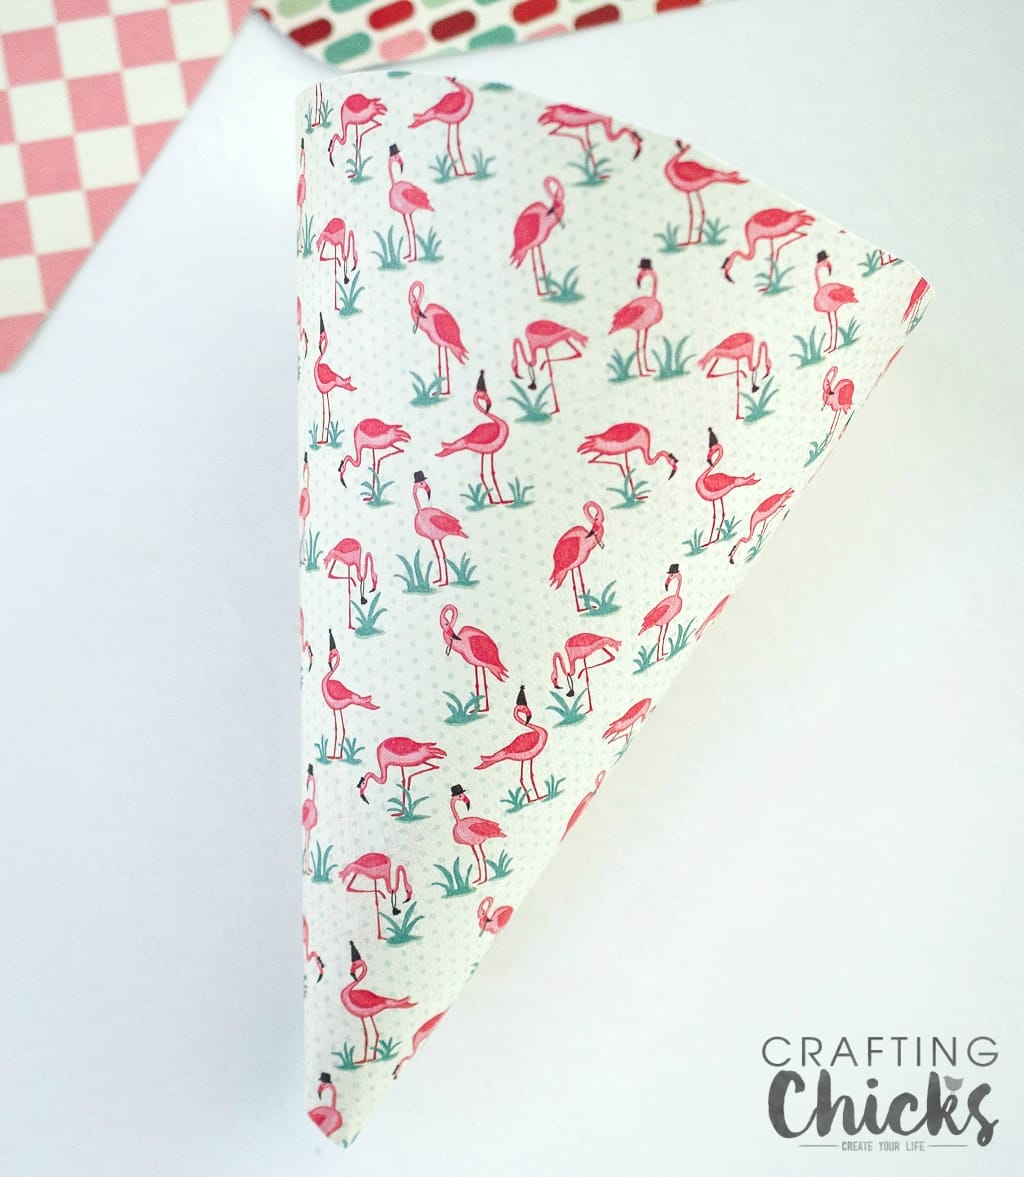 Galentine's Day Gifts are a fun way to celebrate your best gal pals. These adorable cones are sure to put a smile on the faces of all your friends.